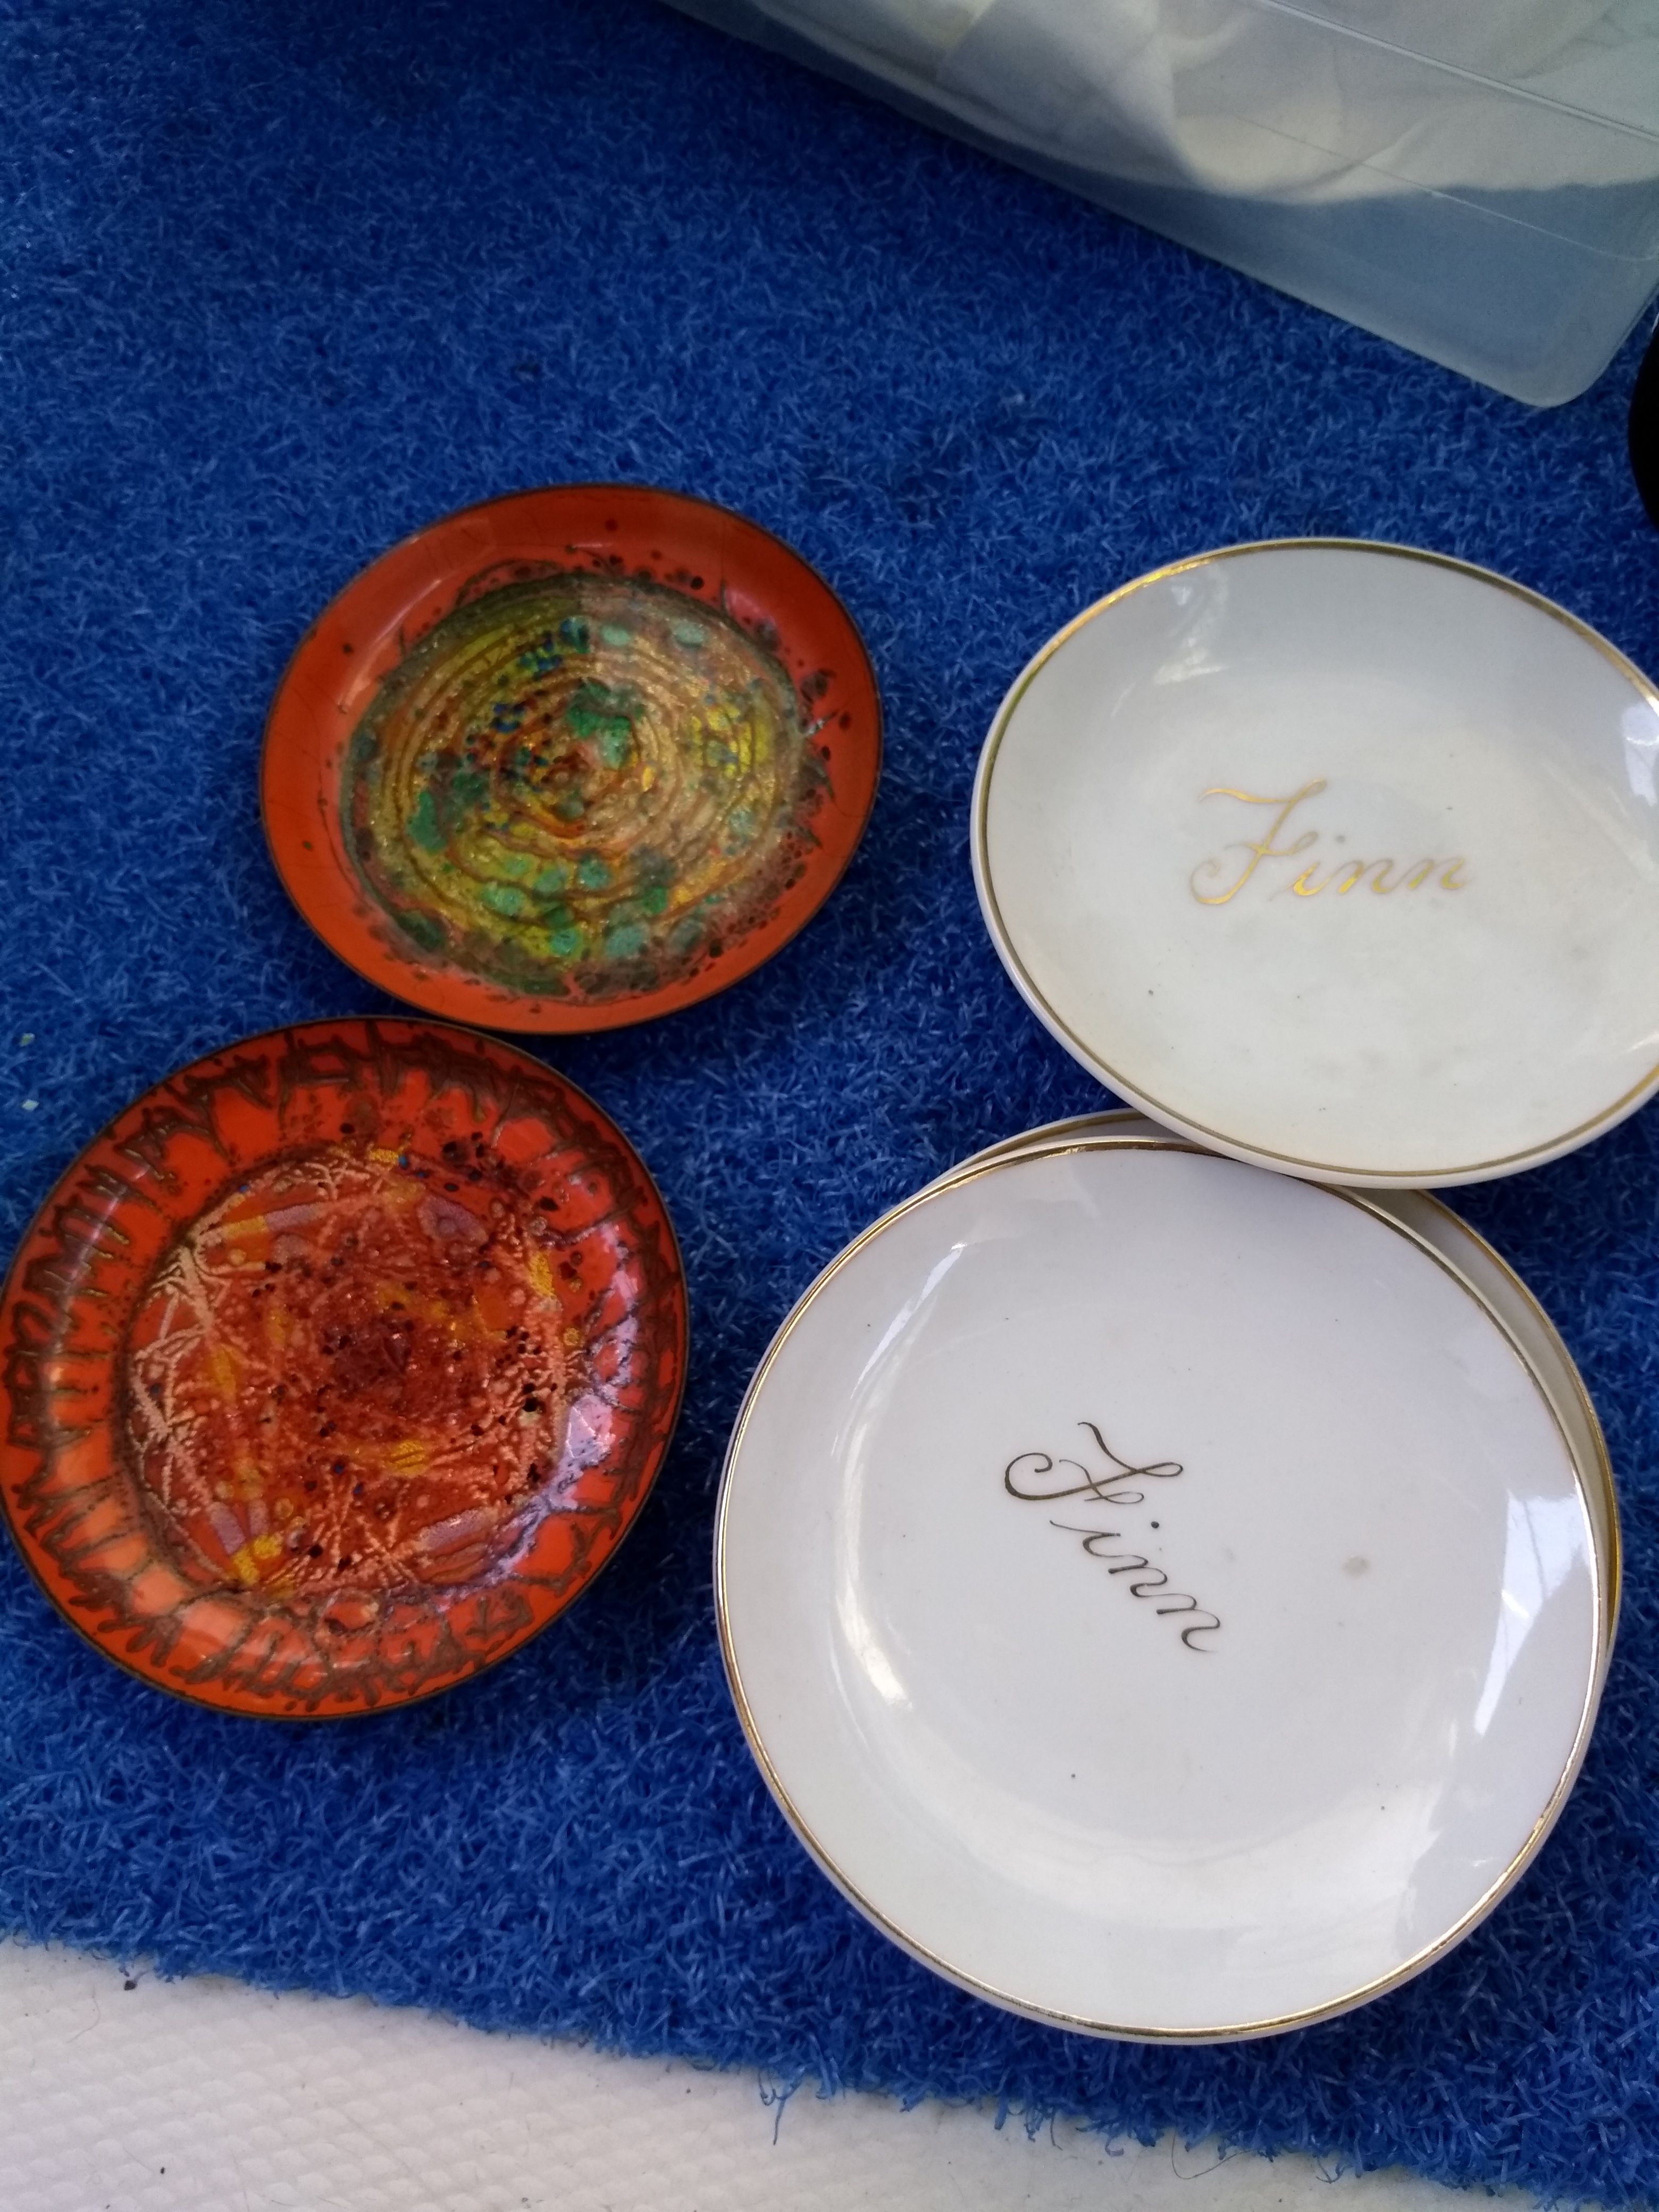 Antique little plates with Finn on front